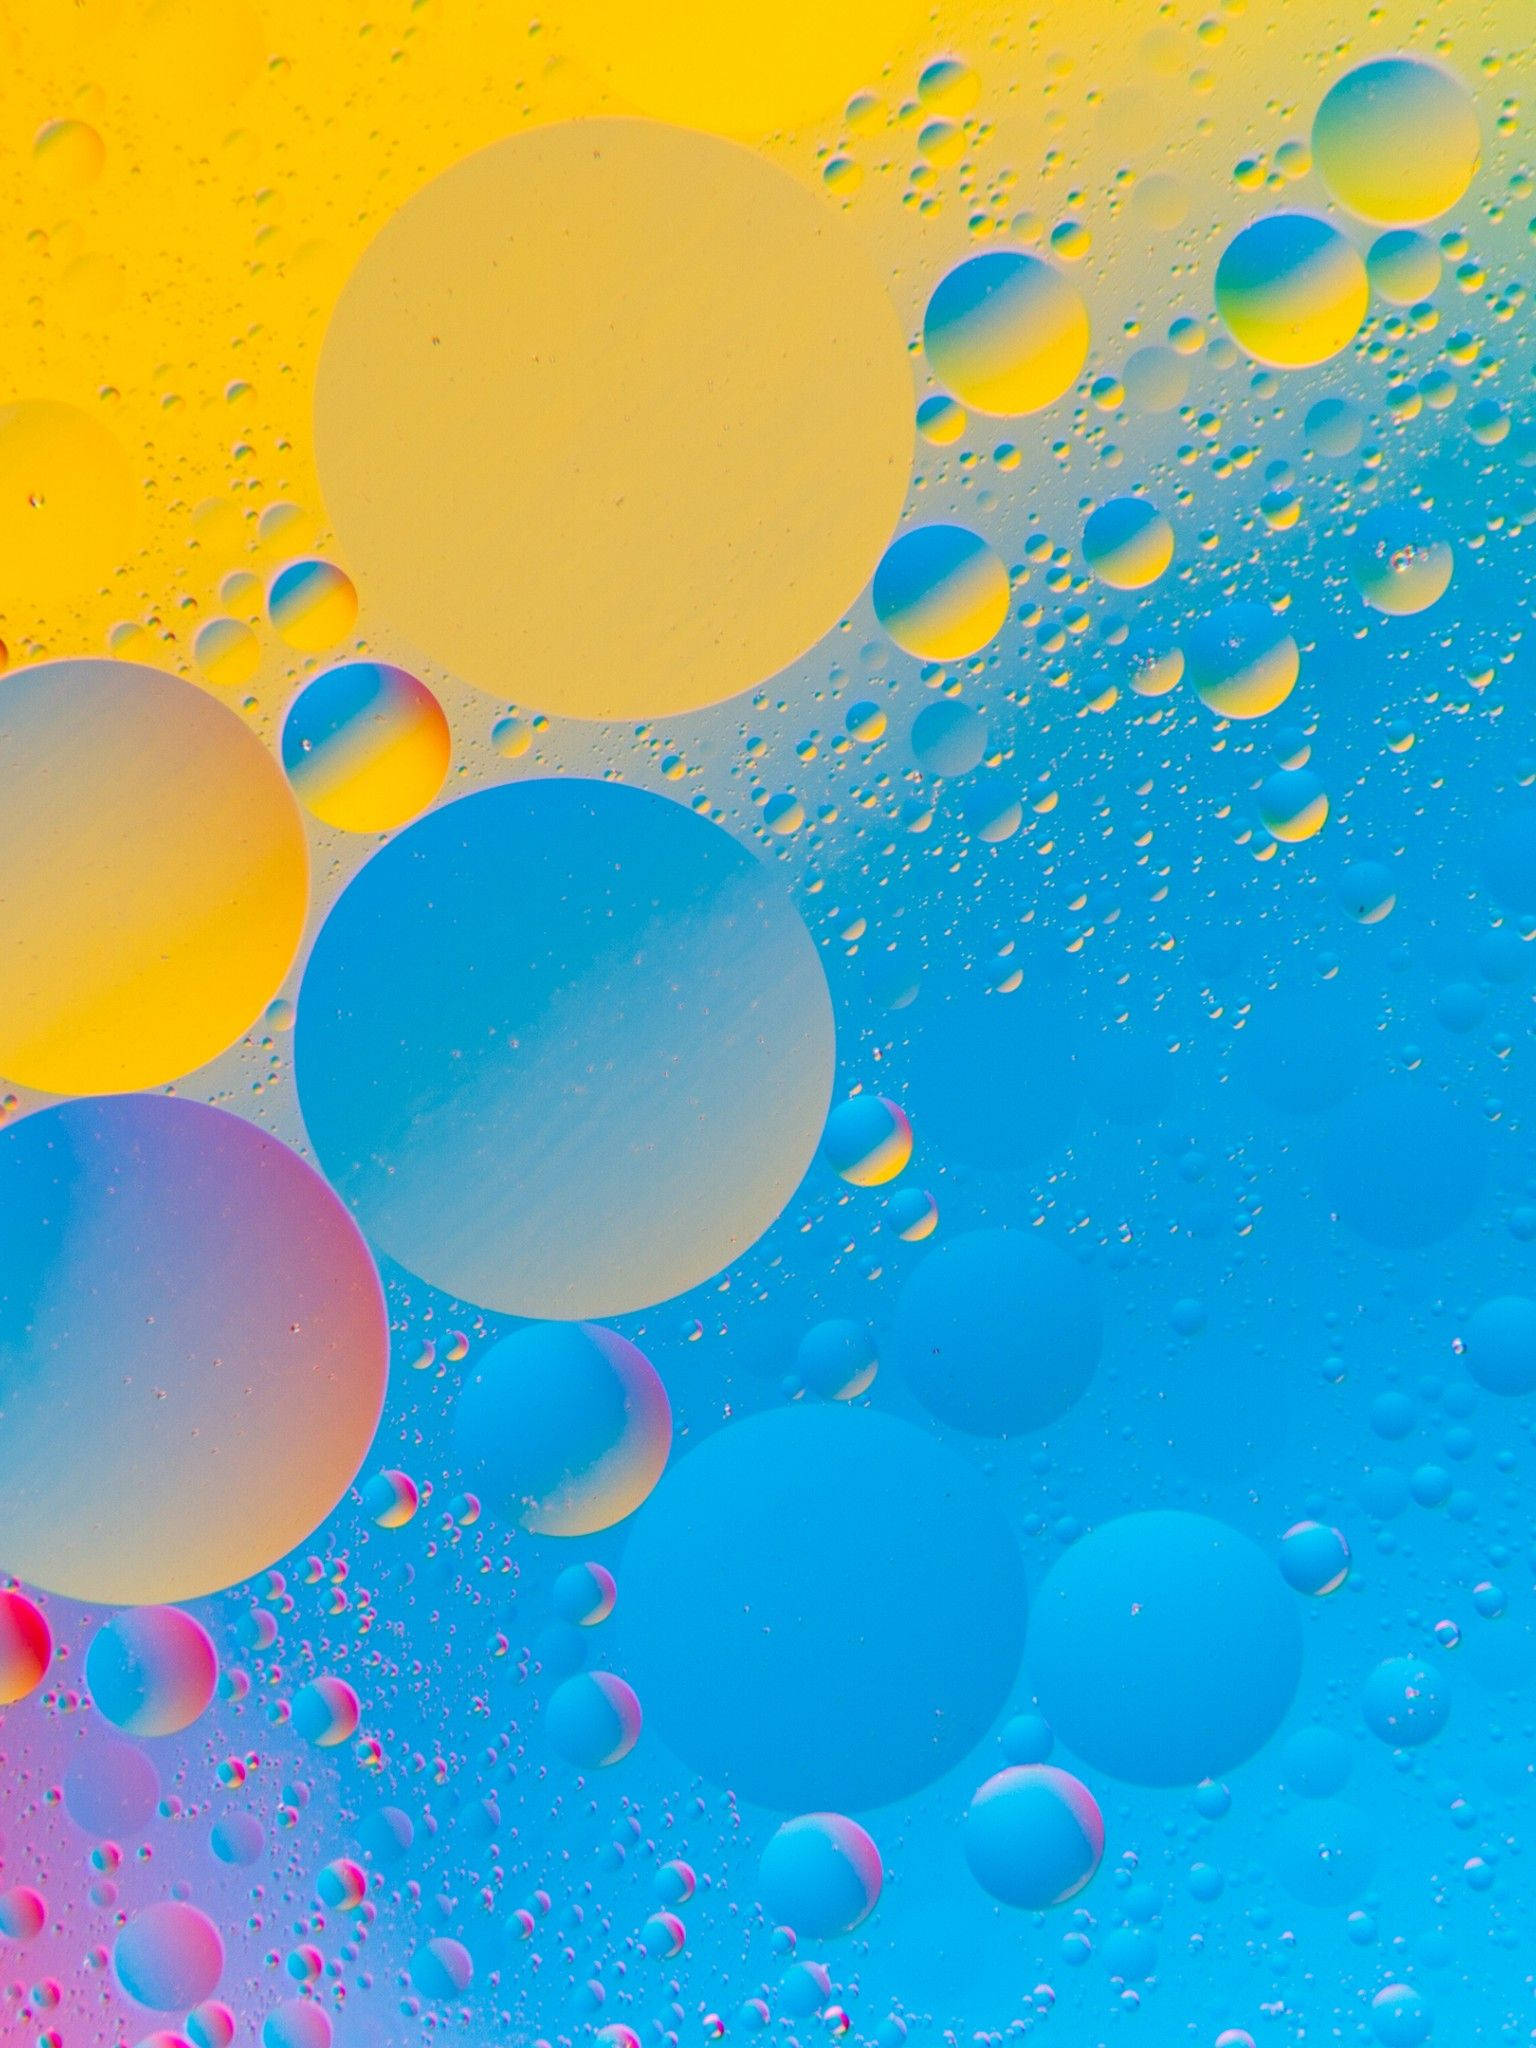 Colored Bubbles As Official Ipad Display